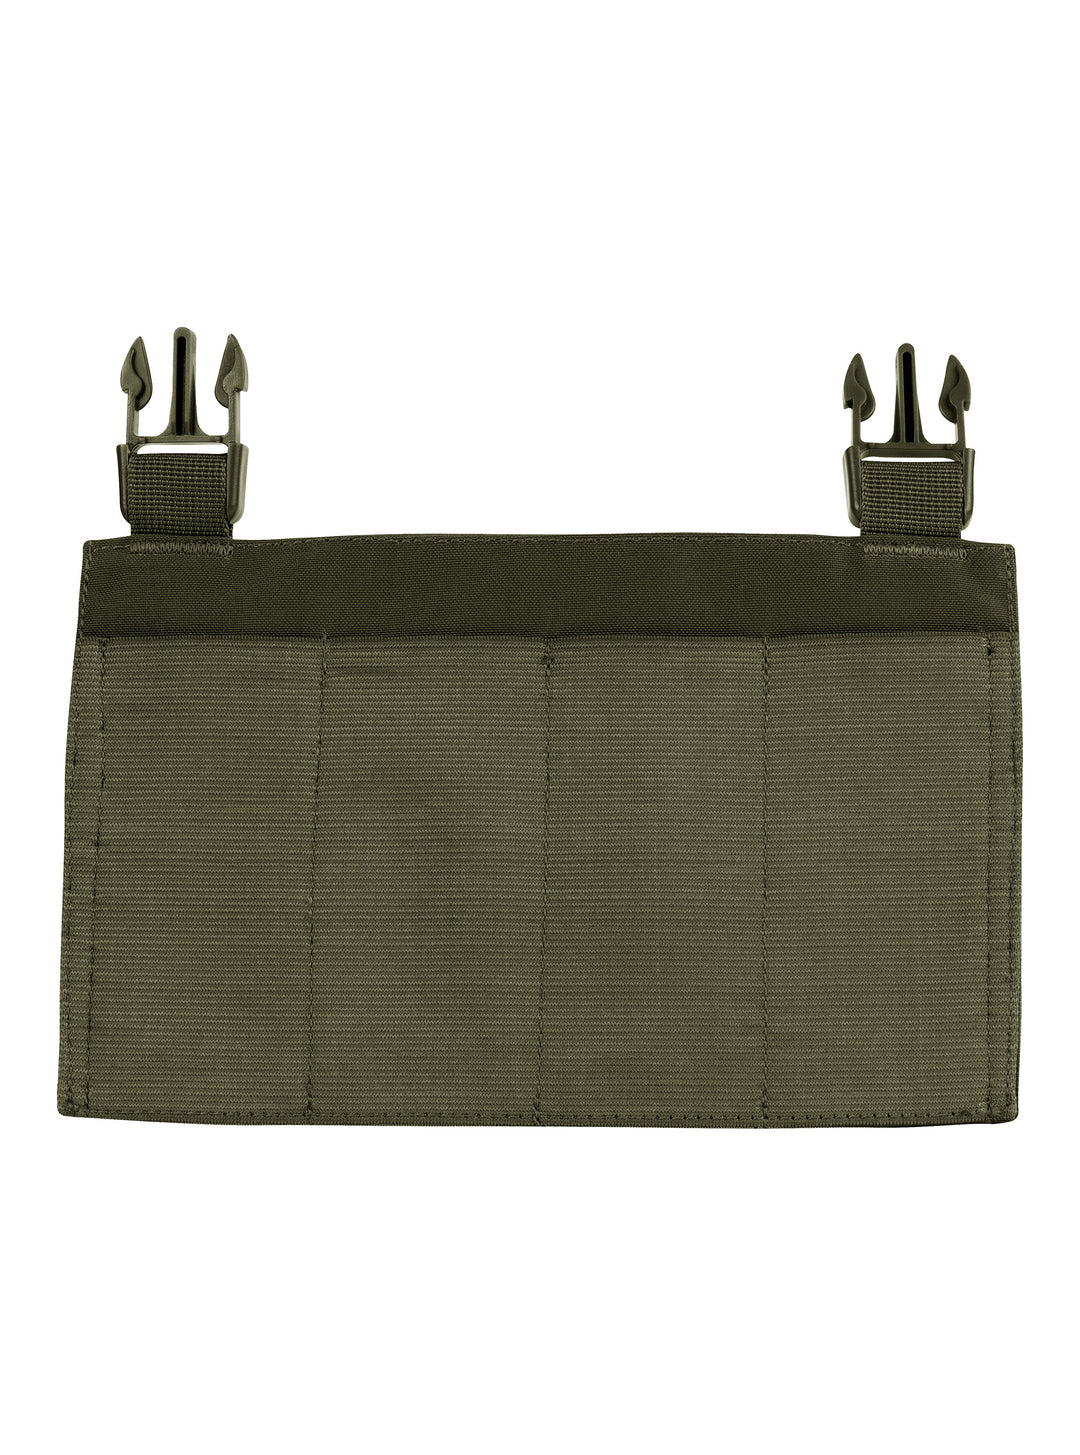 Viper Tactical VX Buckle Up SMG Mag Panel